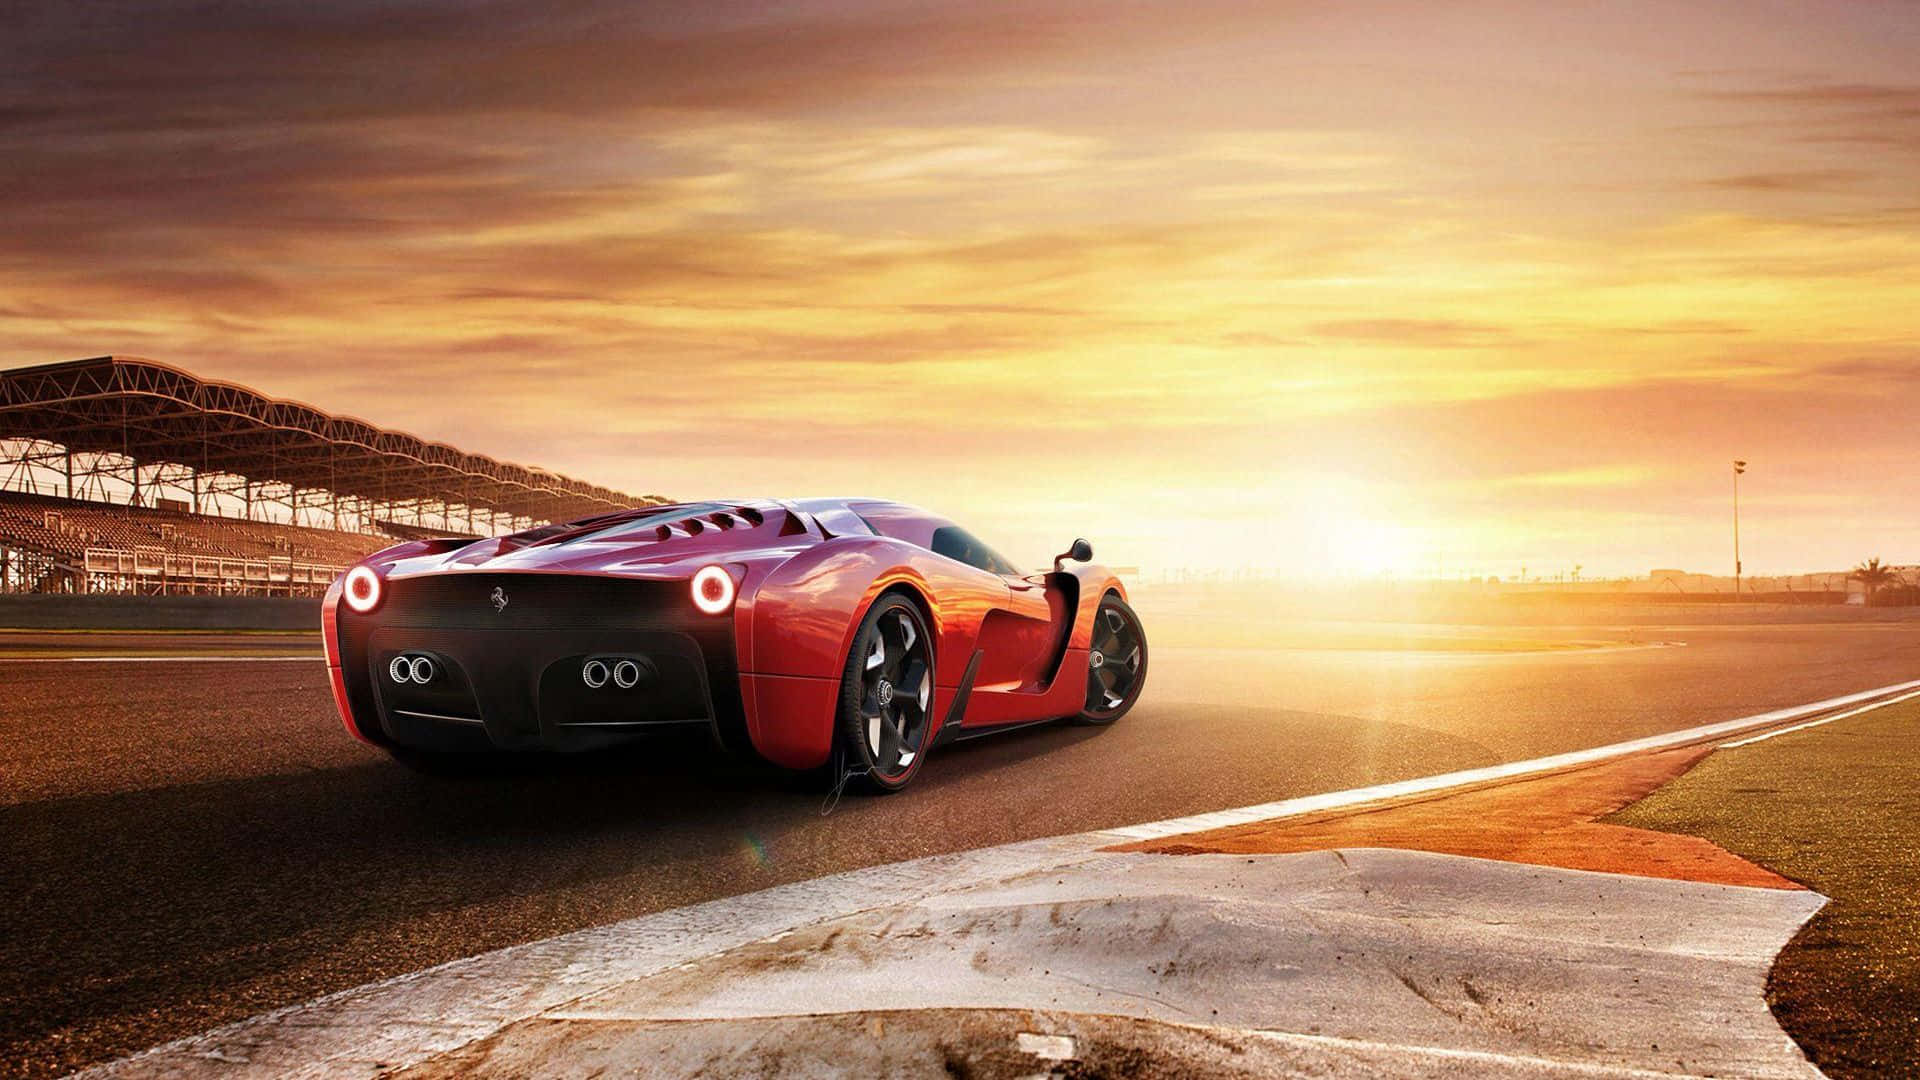 A Red Sports Car Driving On A Track At Sunset